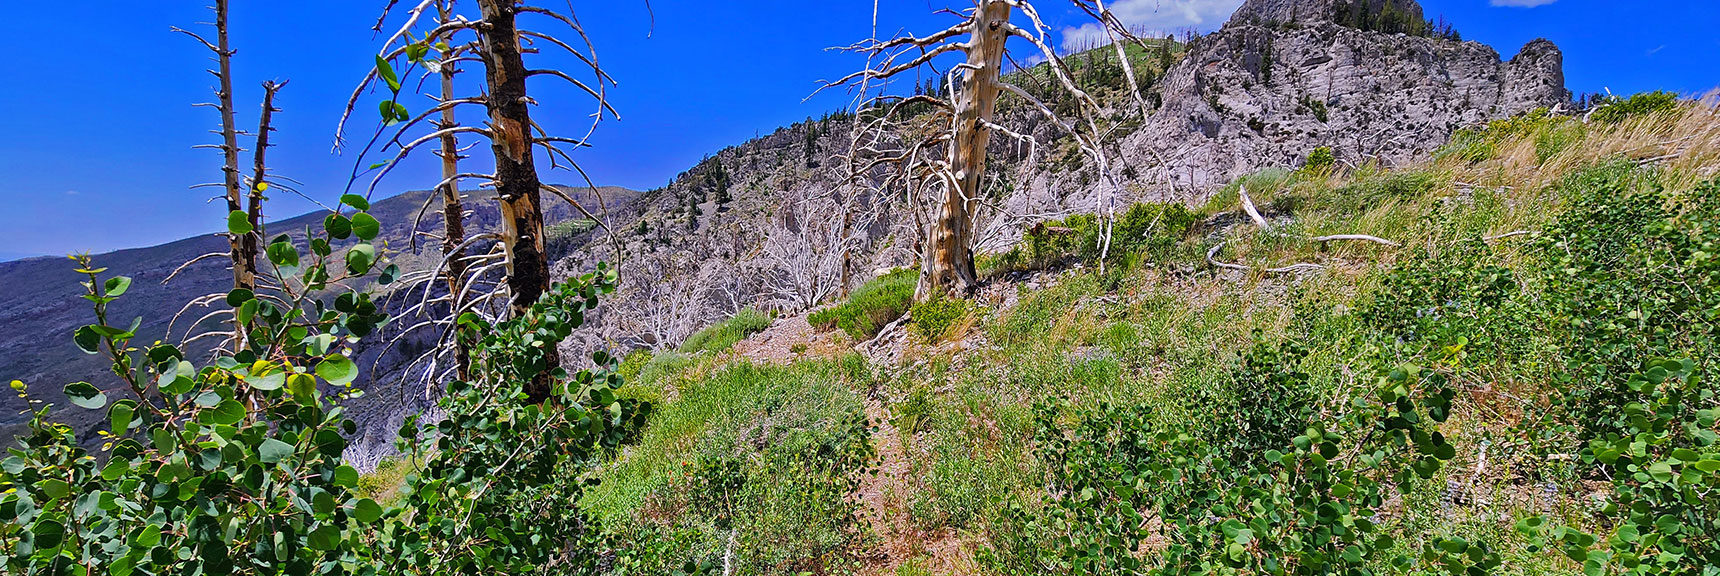 Connected with Griffith Peak Trail, Ascends Cliffs and Ridge to Griffith Peak Summit | Fletcher Canyon Trailhead to Harris Mountain Summit to Griffith Peak Summit Circuit Adventure | Mt. Charleston Wilderness, Nevada